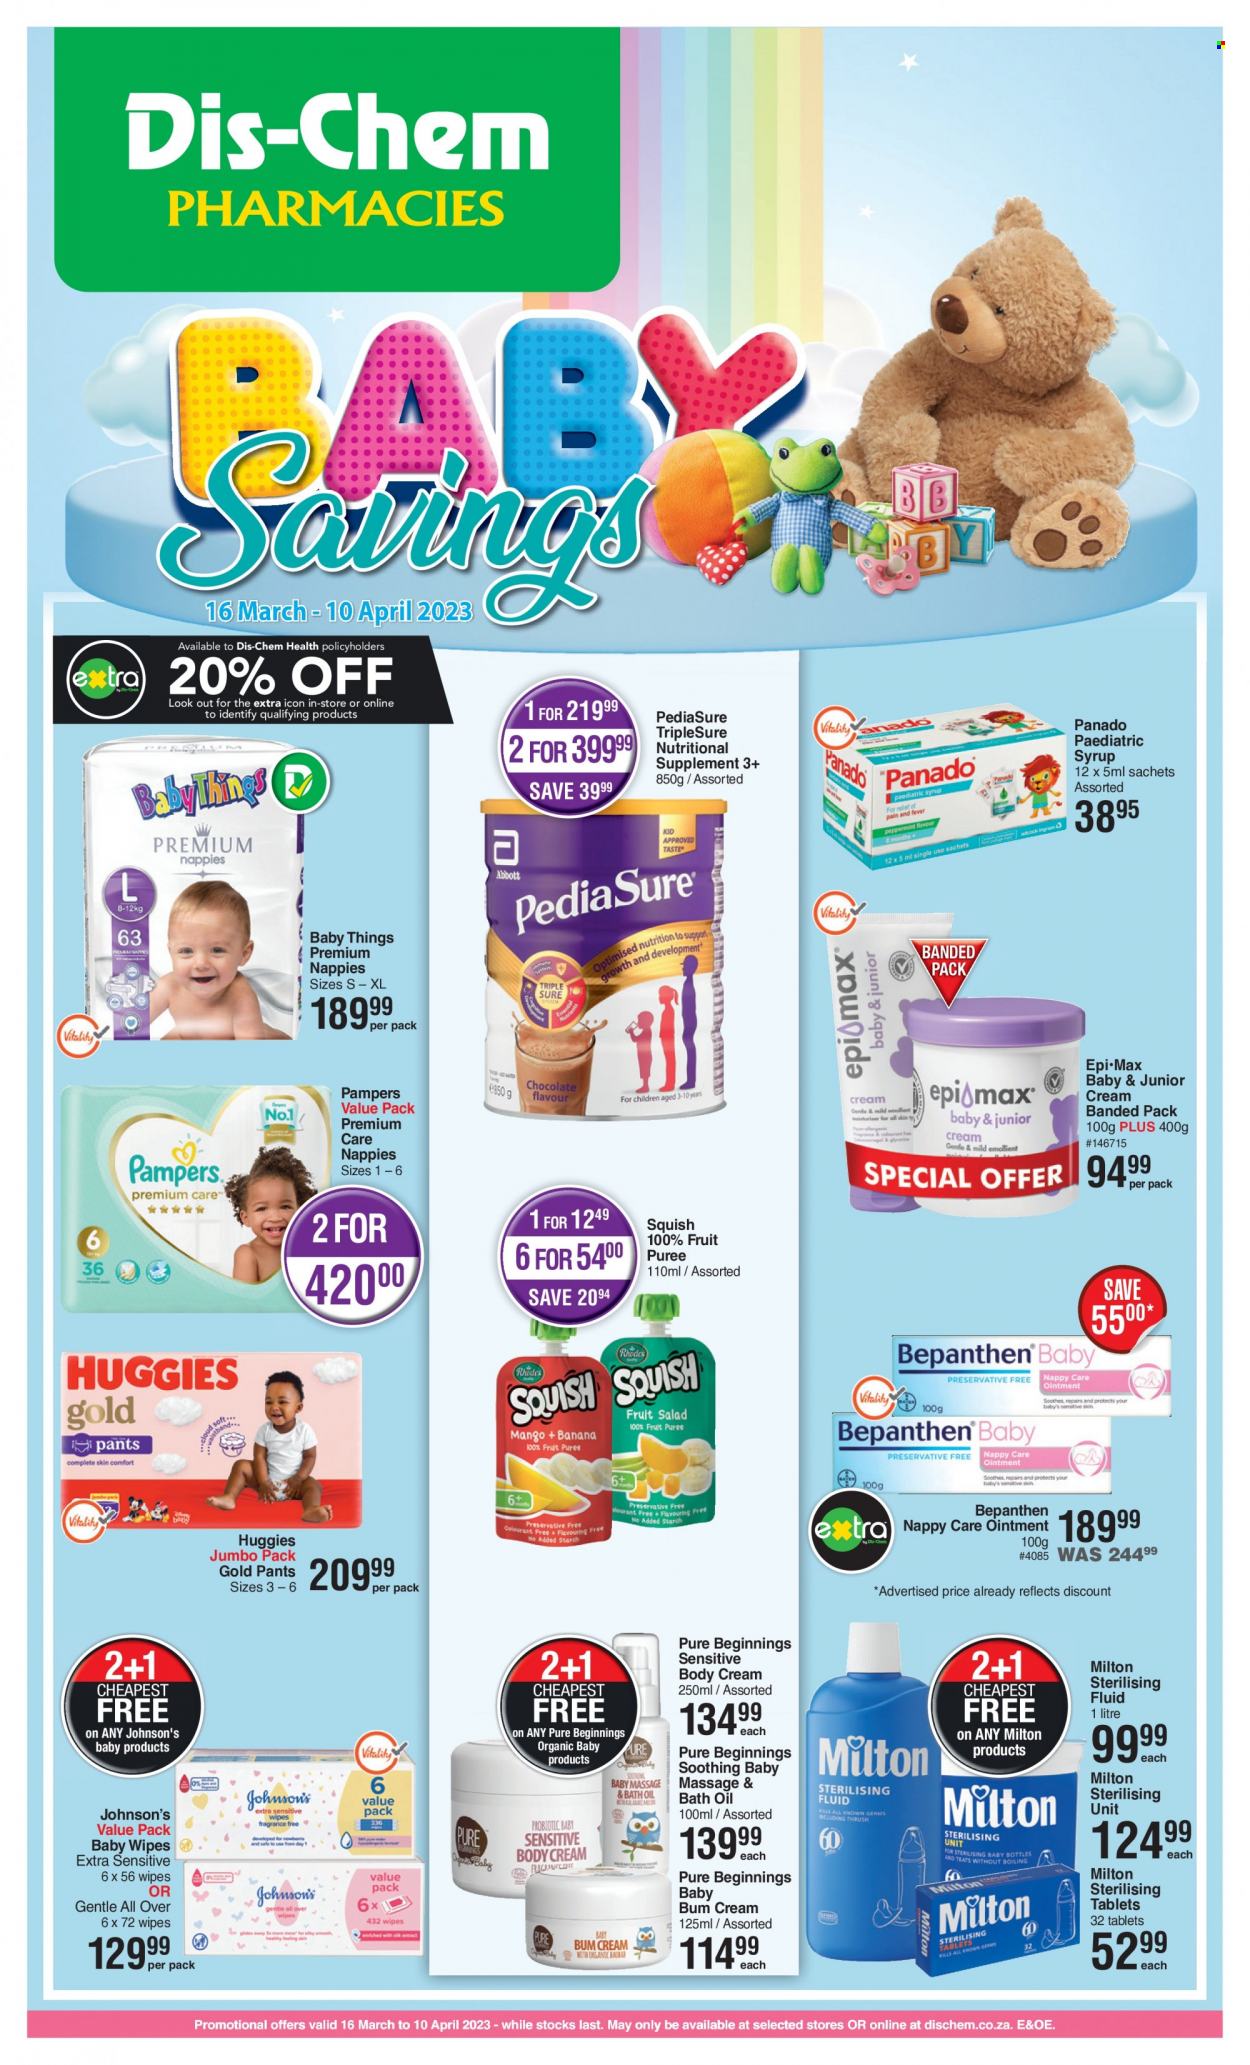 thumbnail - Dis-Chem catalogue  - 16/03/2023 - 10/04/2023 - Sales products - wipes, Huggies, Pampers, pants, baby wipes, nappies, Johnson's, ointment, Epi-Max, bath oil, syrup, nutritional supplement, Panado, paediatric syrup. Page 1.